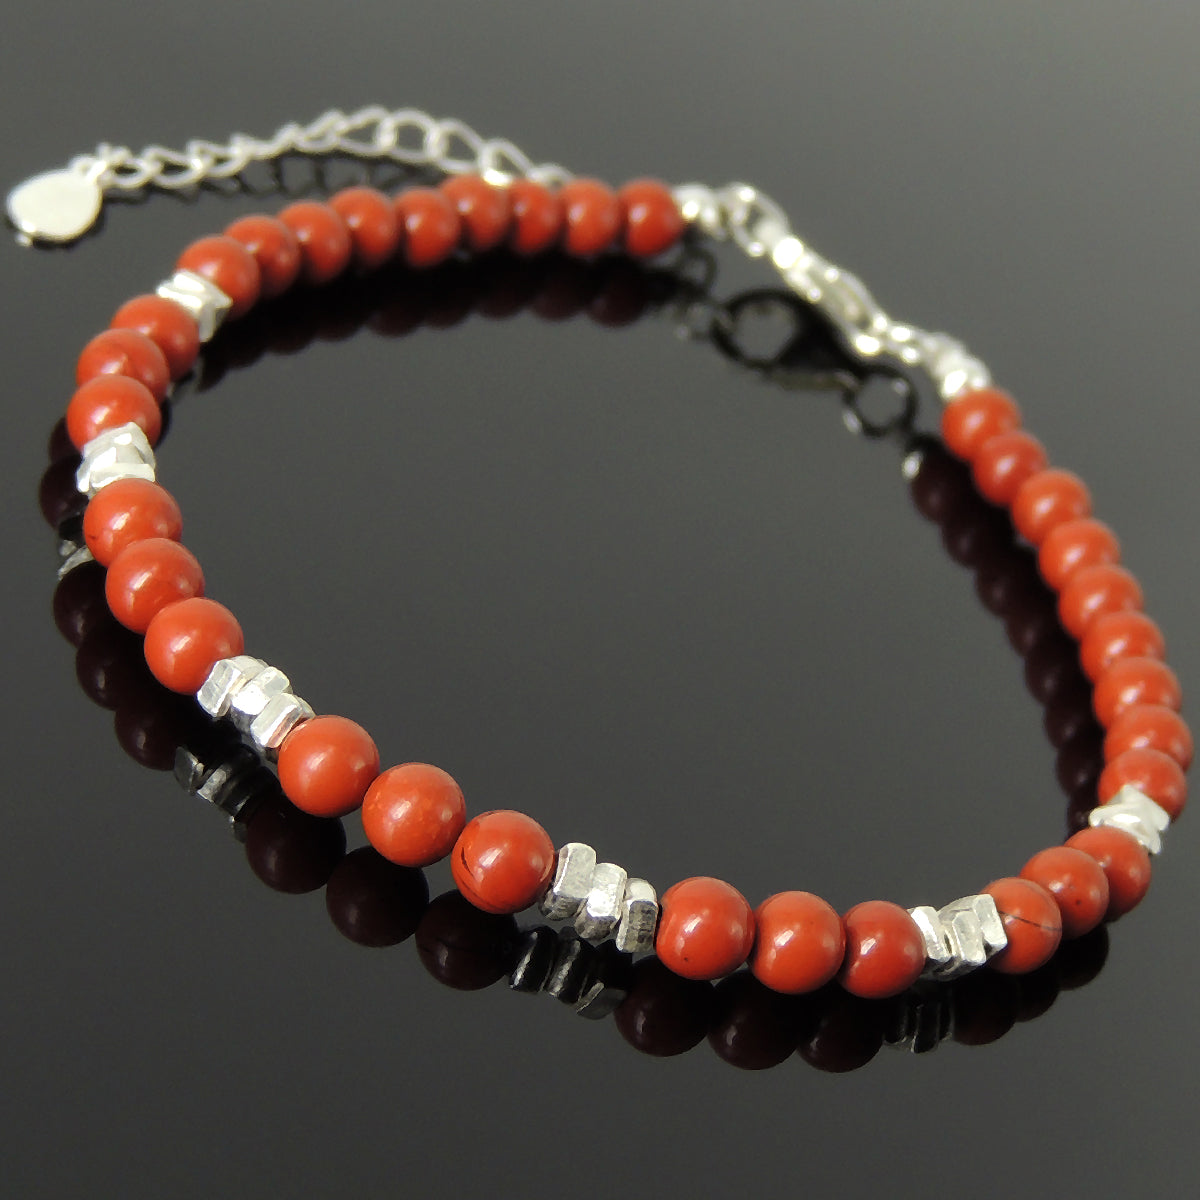 4mm Red Jasper Healing Gemstone Bracelet with S925 Sterling Silver Nugget Beads, Chain, & Clasp - Handmade by Gem & Silver BR1277